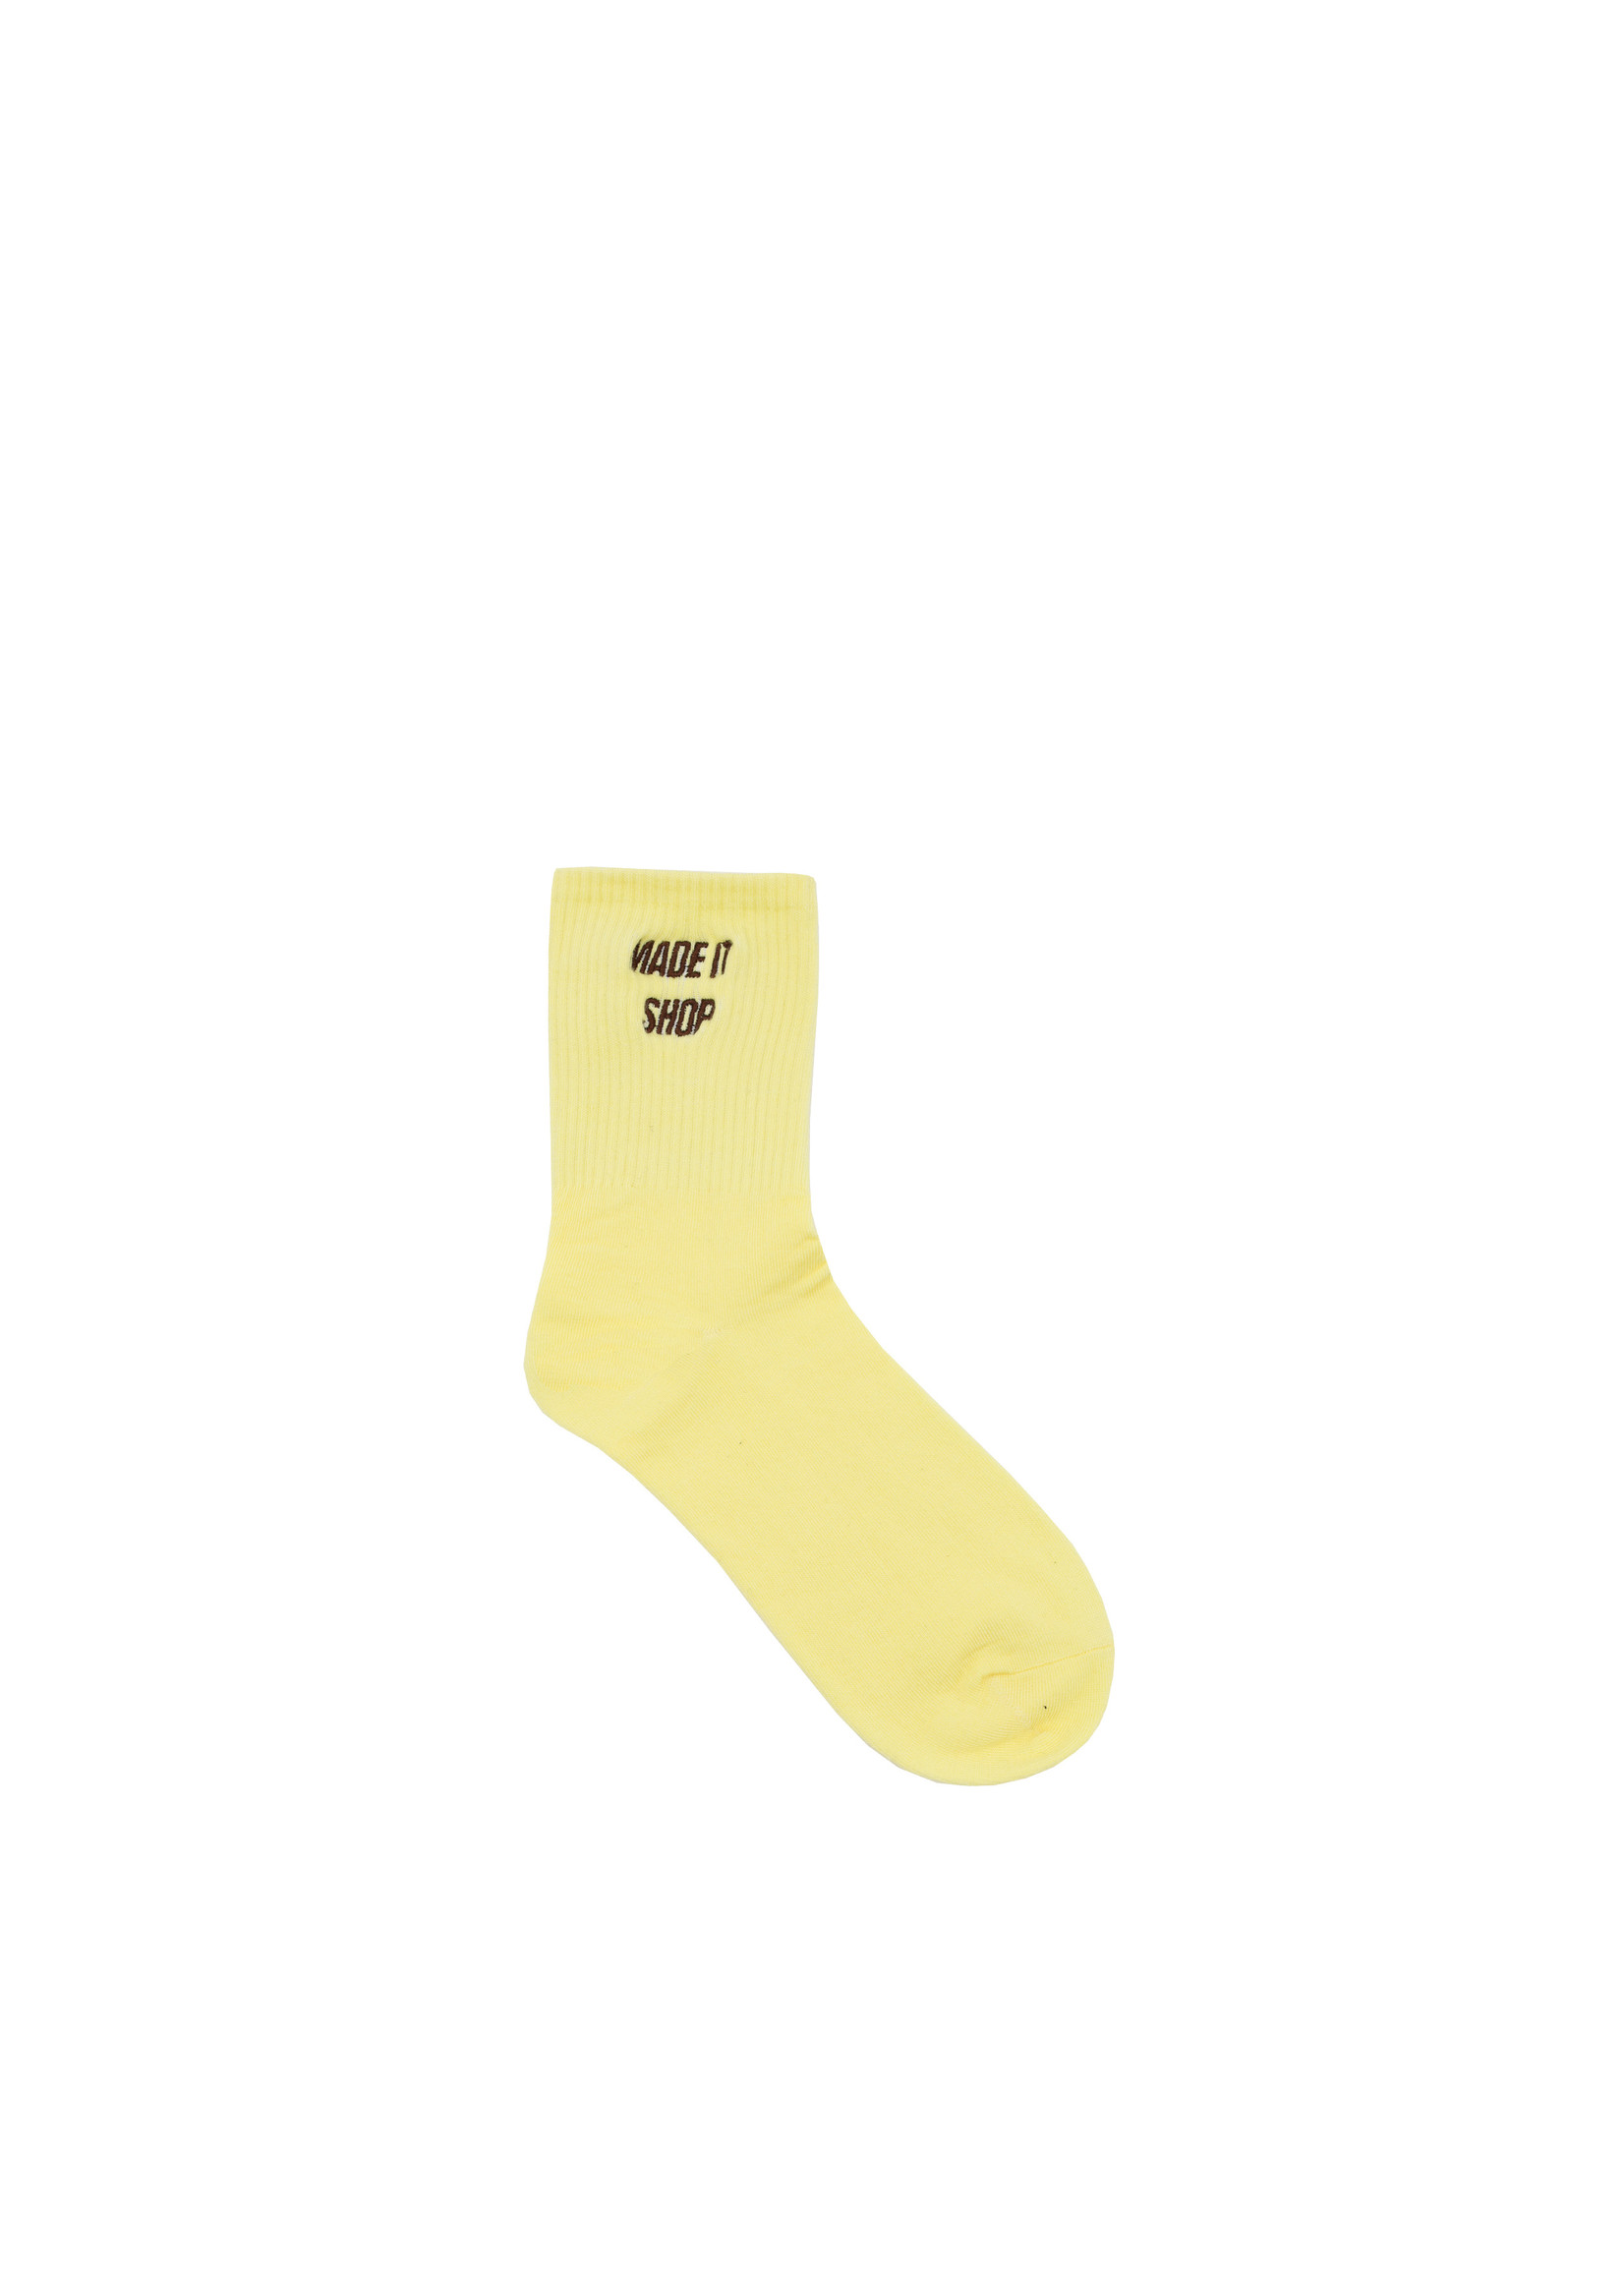 Made It Shop Made It Shop "Yellow/Brown" Socks